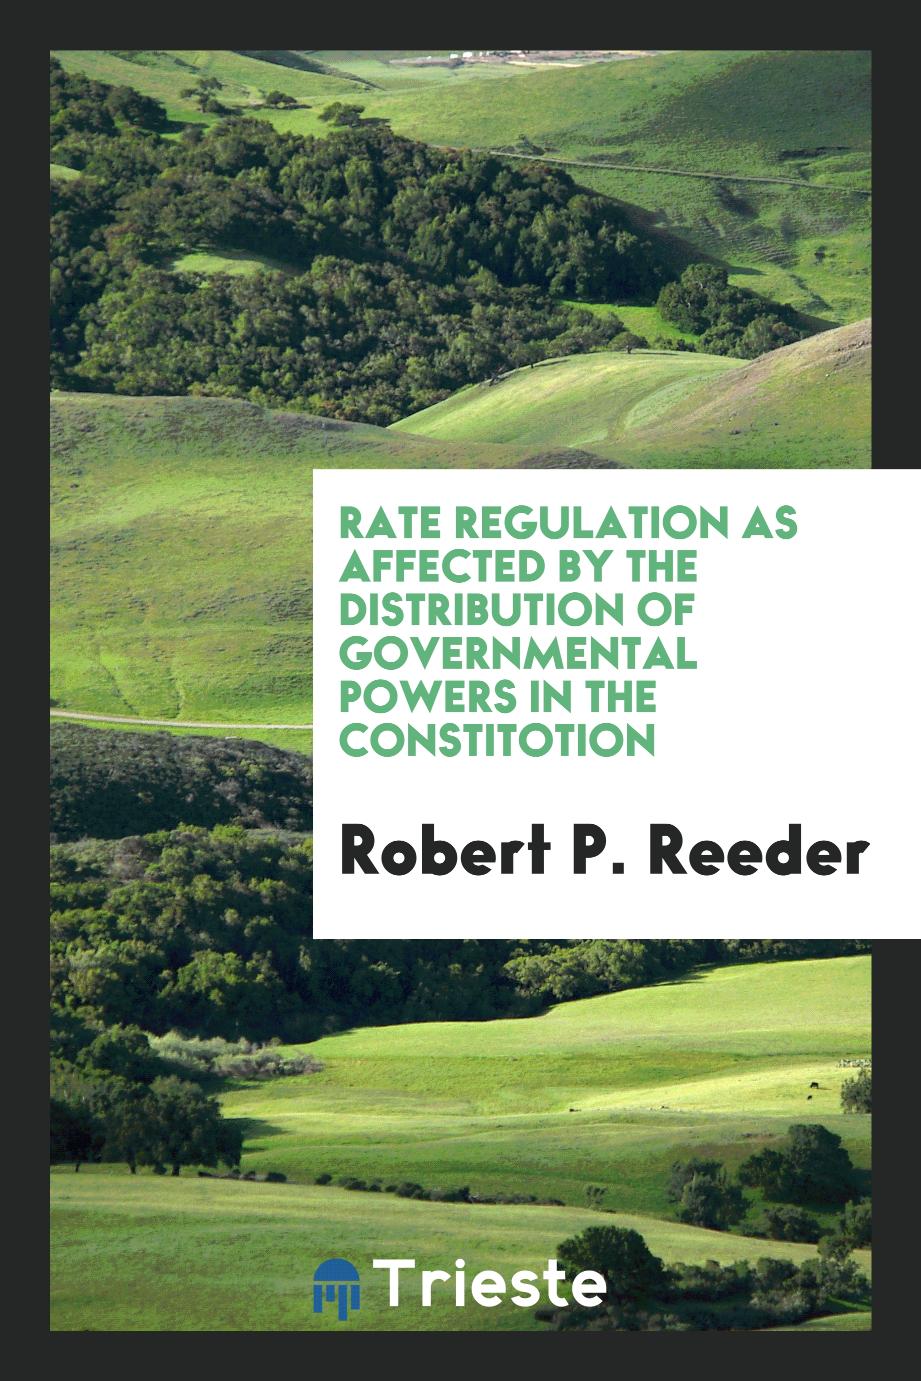 Rate Regulation as Affected by the Distribution of Governmental Powers in the Constitotion